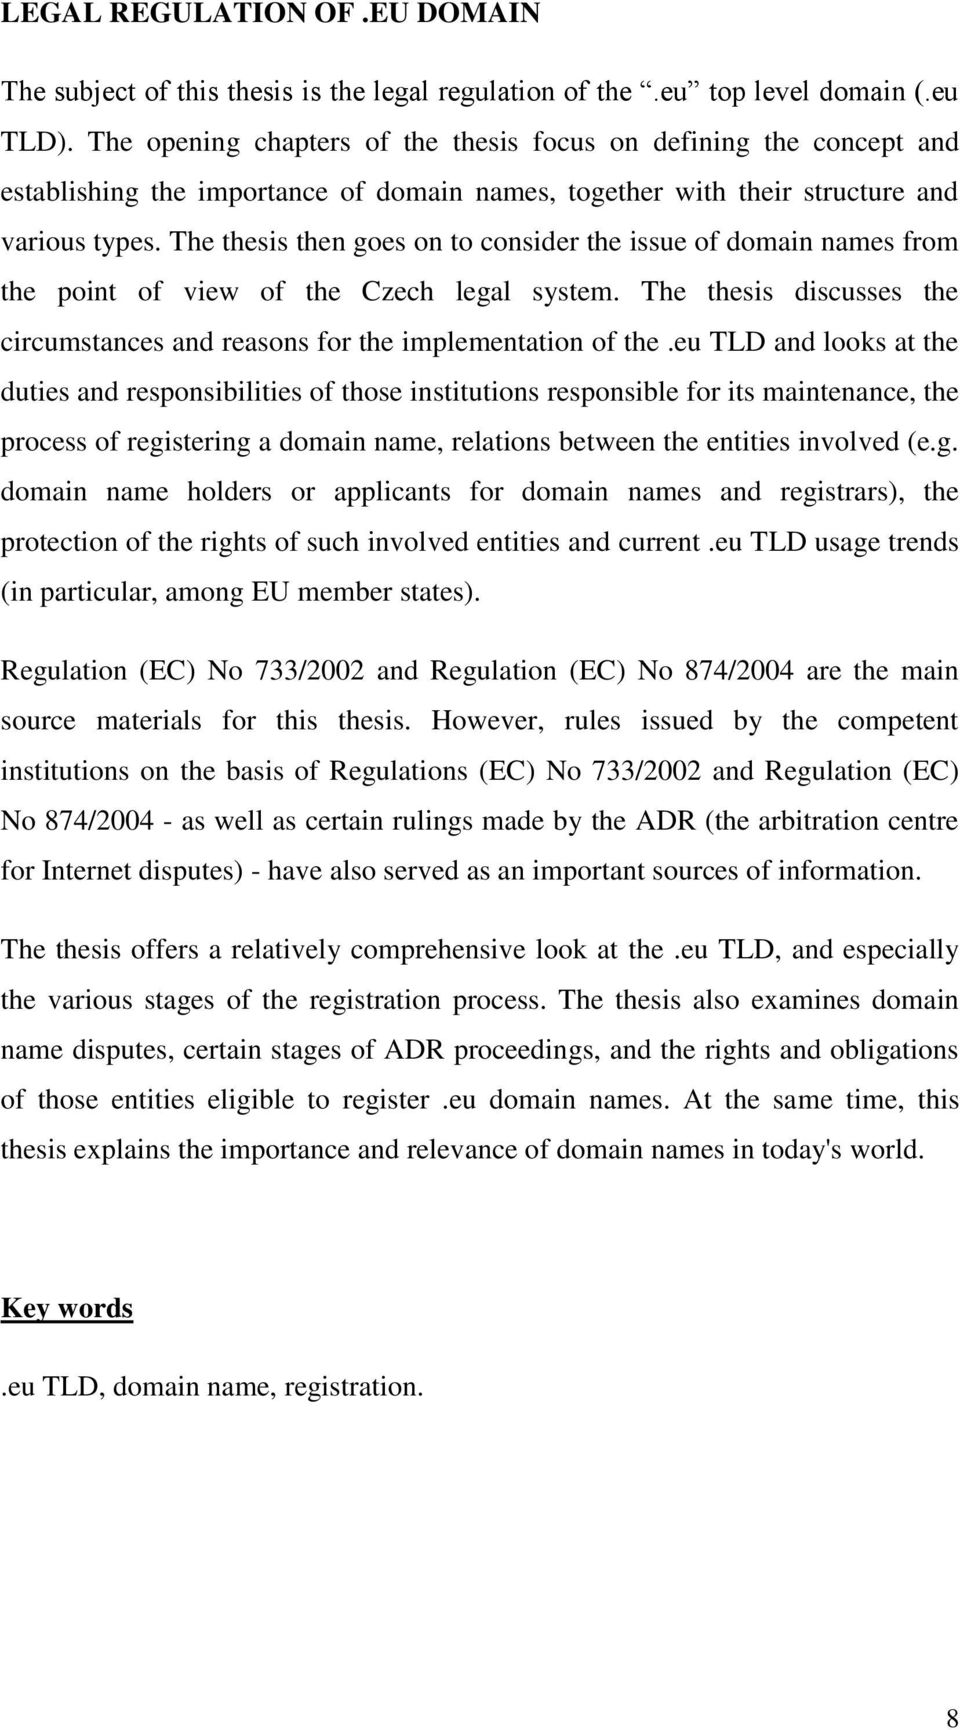 The thesis then goes on to consider the issue of domain names from the point of view of the Czech legal system. The thesis discusses the circumstances and reasons for the implementation of the.